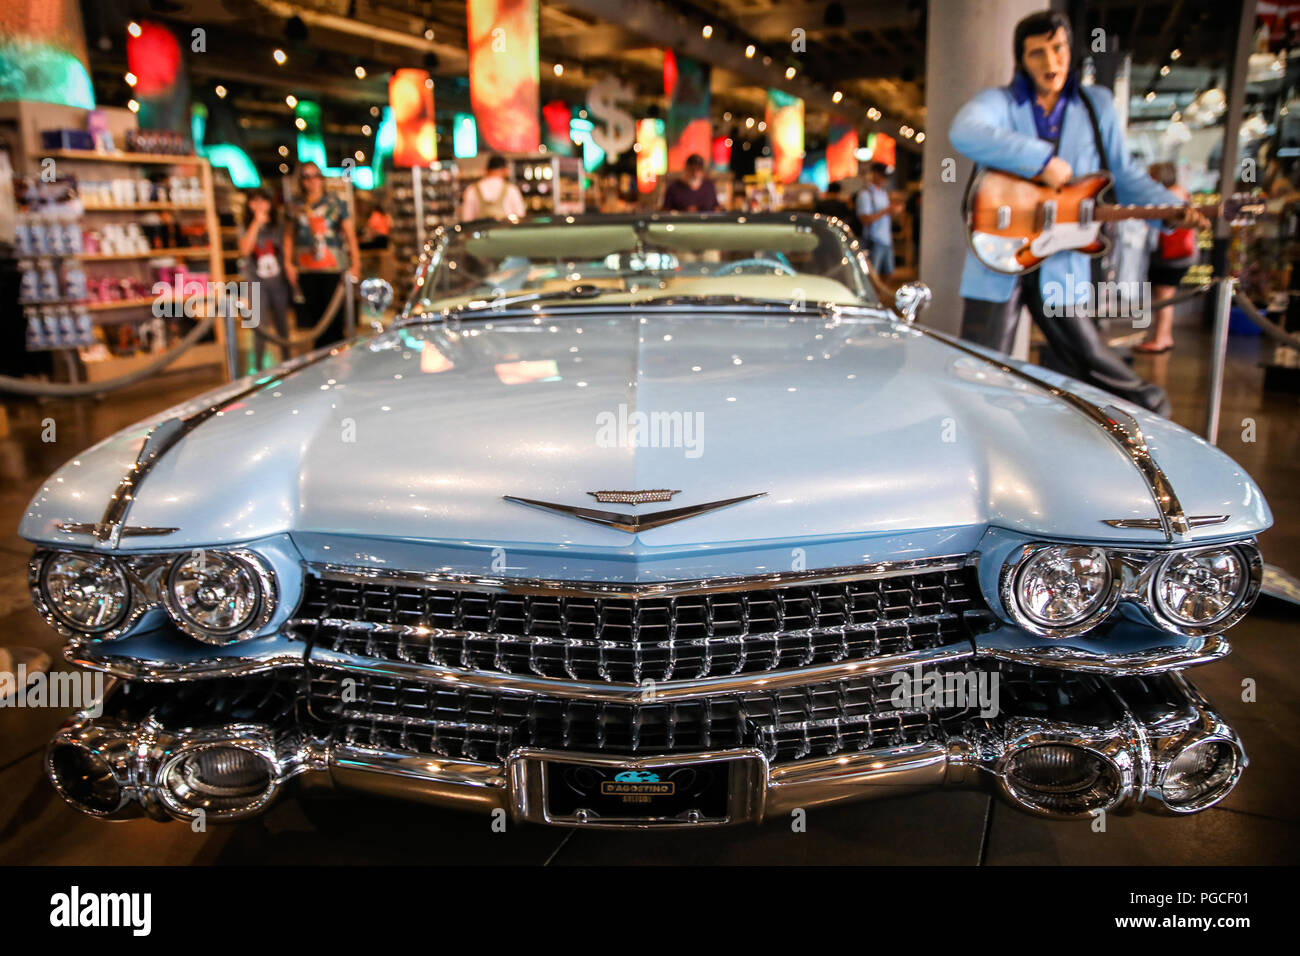 Los Angeles, United States of America - July 19, 2017: The Elvis II Cadillac at La La Land in Hollywood. Stock Photo